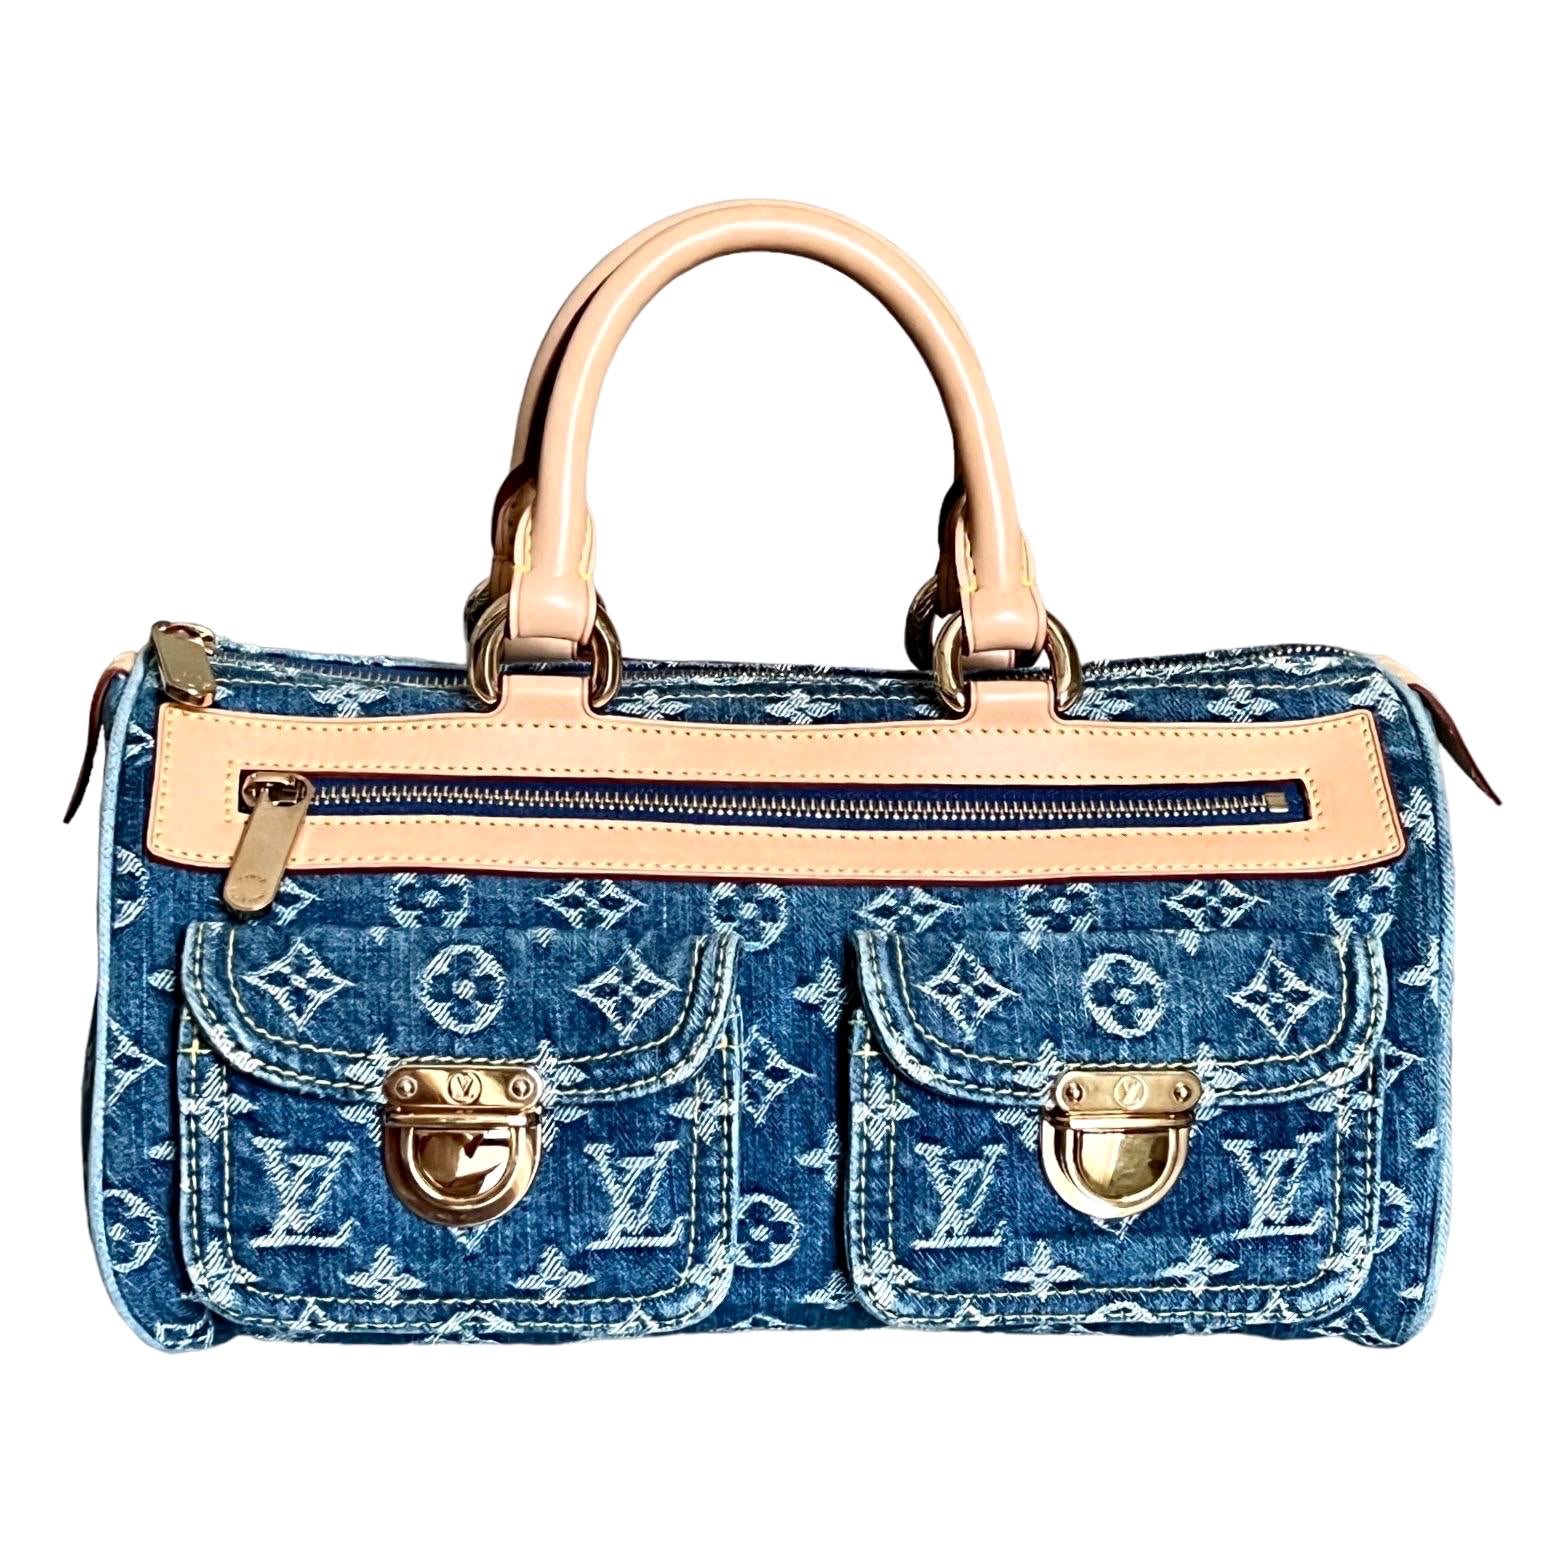 Louis Vuitton By Marc Jacobs - 4 For Sale on 1stDibs